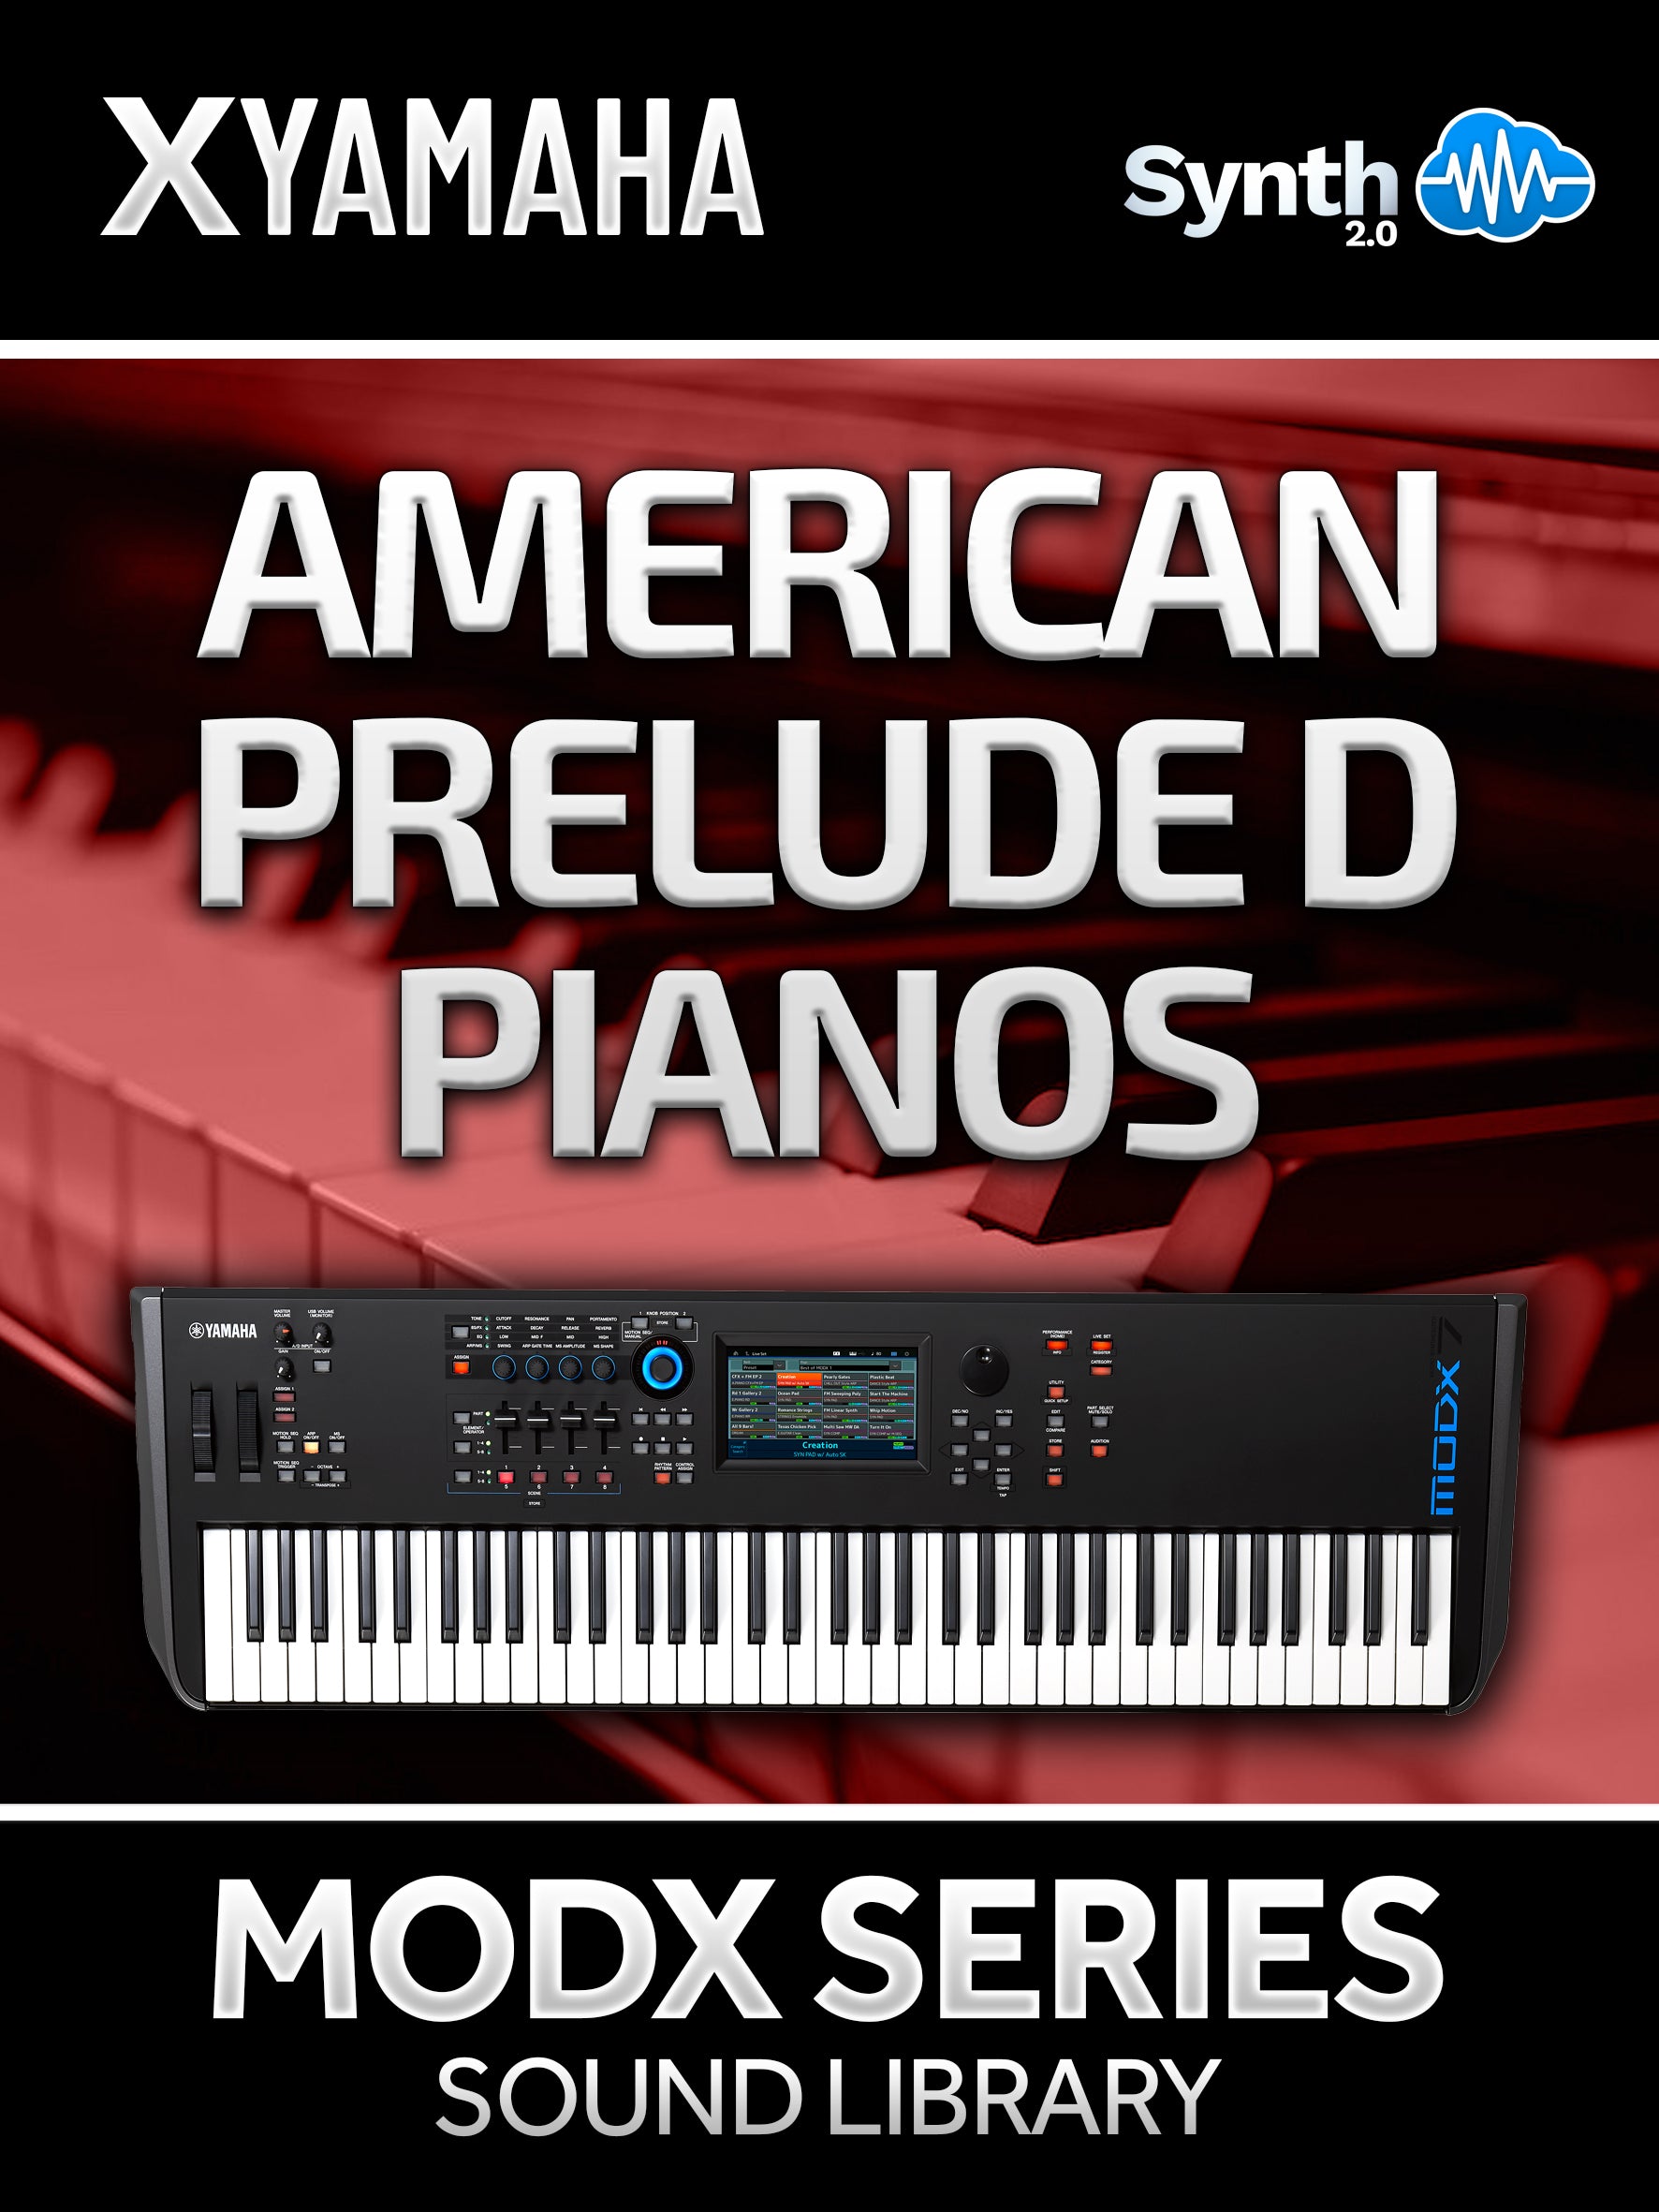 SCL225 - American Prelude D Pianos - Yamaha MODX / MODX+ ( 10 presets )